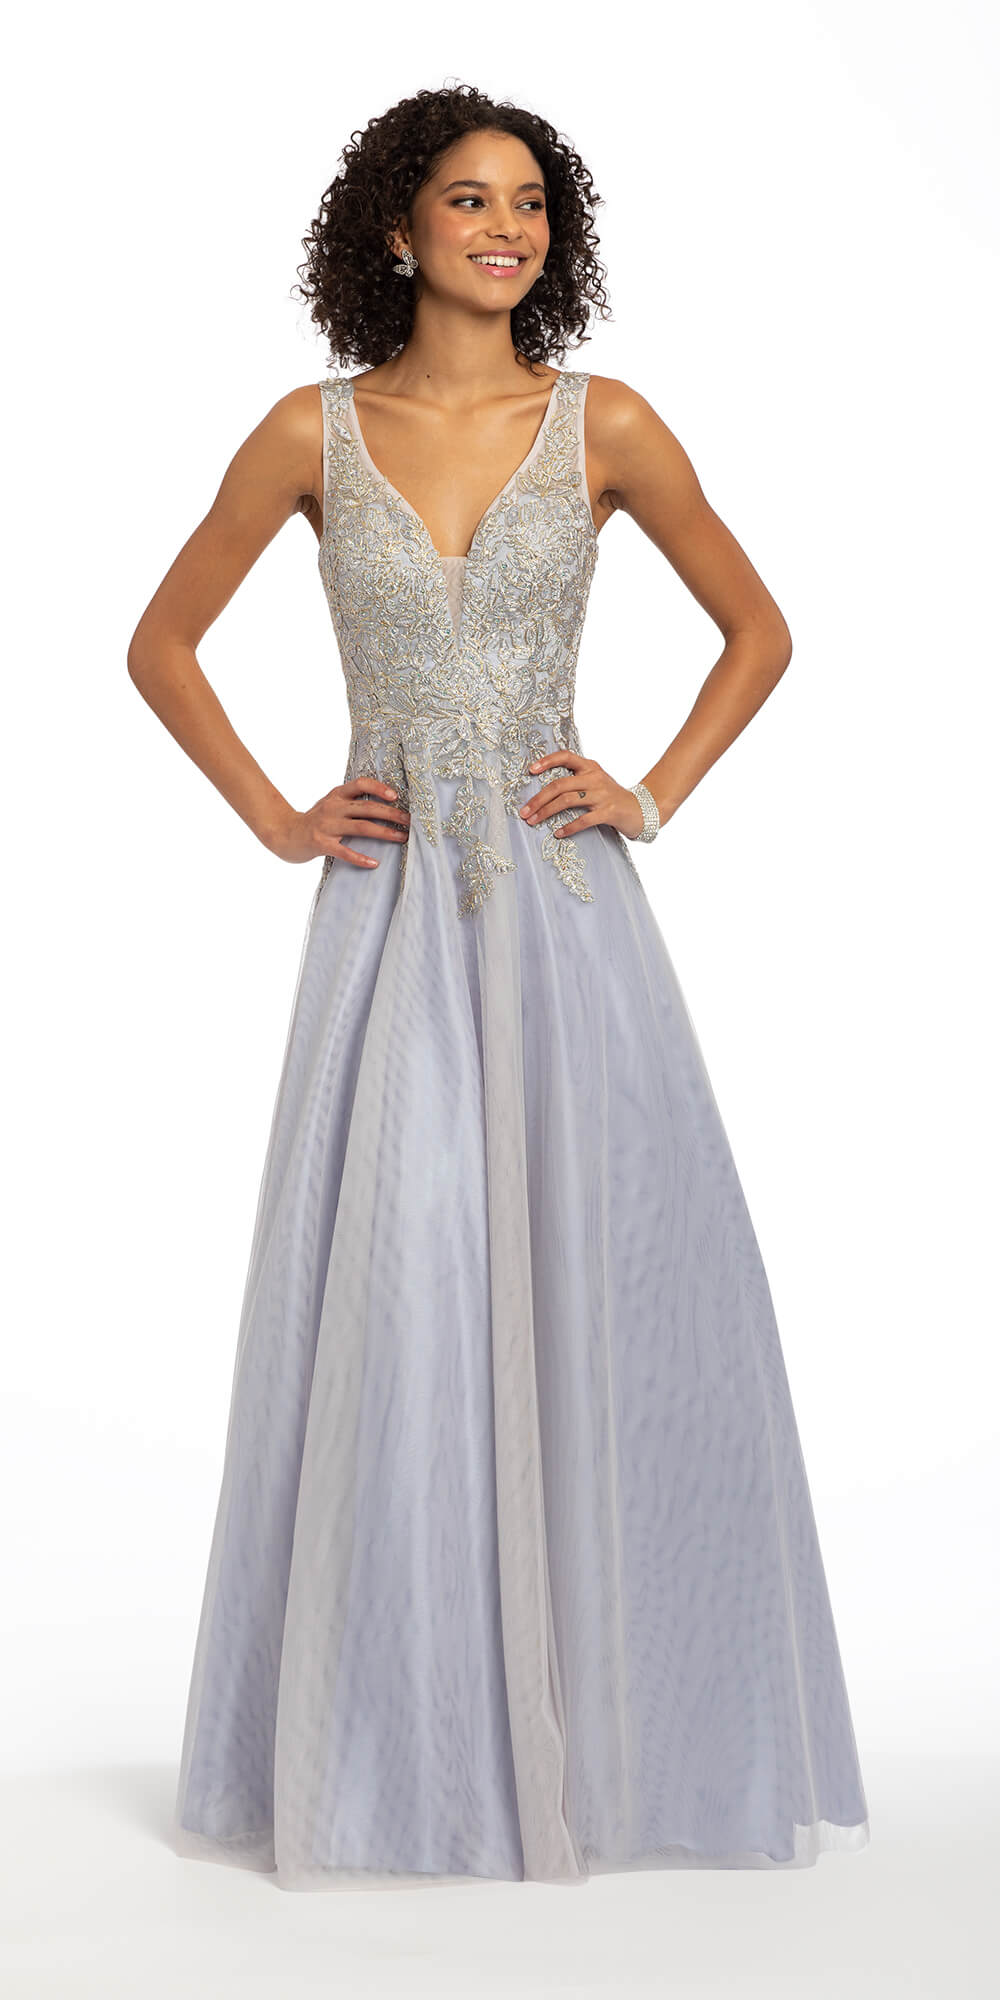 Camille La Vie Plunging Embroidered Sleeveless Two Tone Ballgown missy / 2 / silver